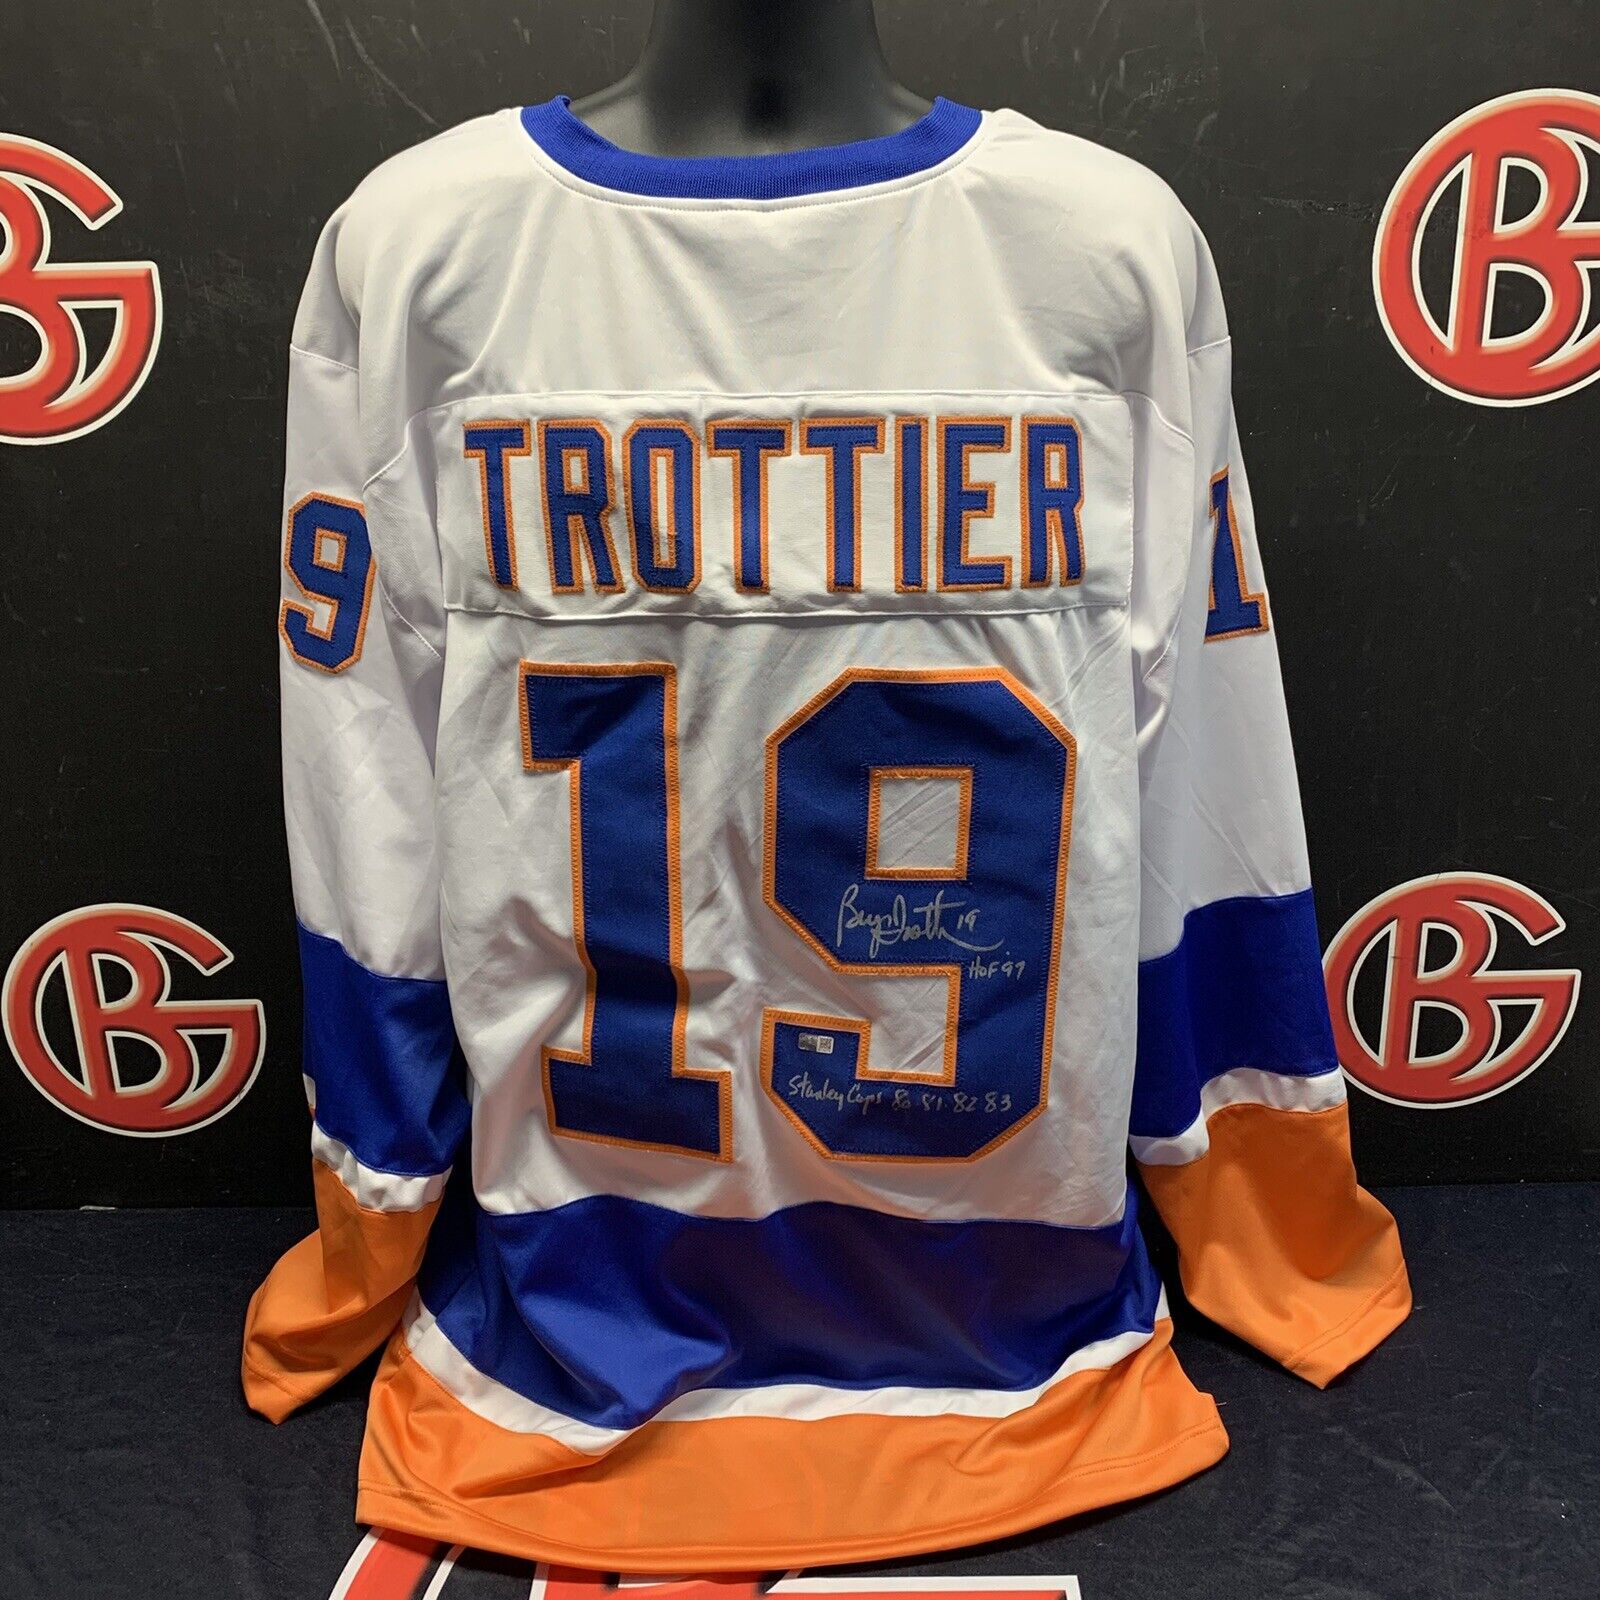 Bryan Trottier Autographed Signed White Islanders Jersey Inscribed Steiner